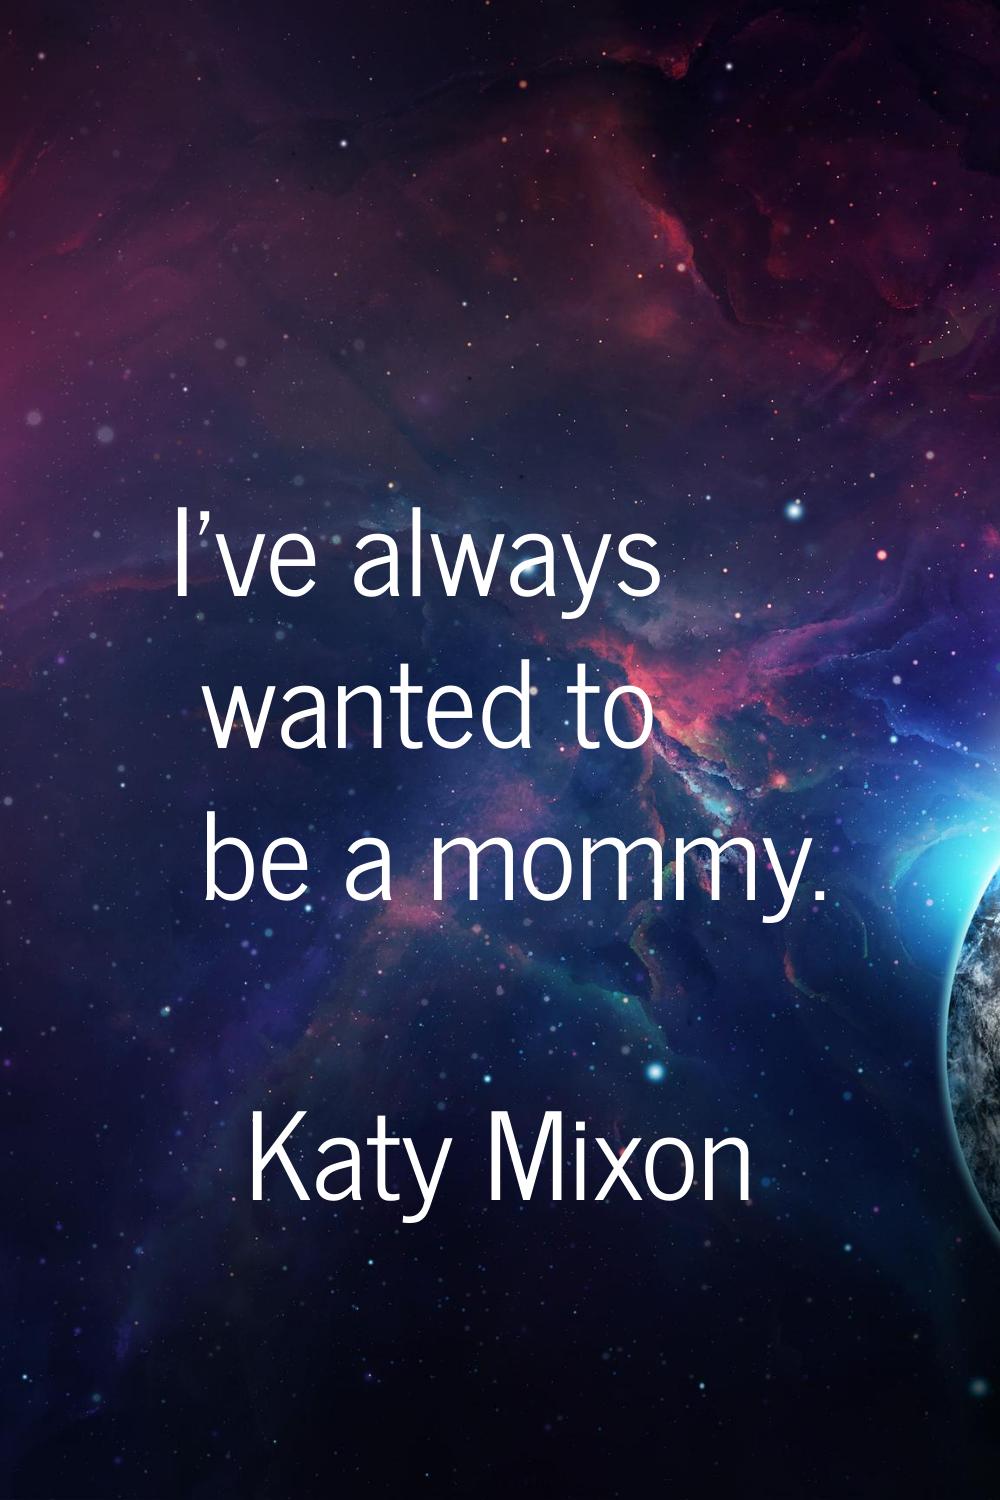 I've always wanted to be a mommy.